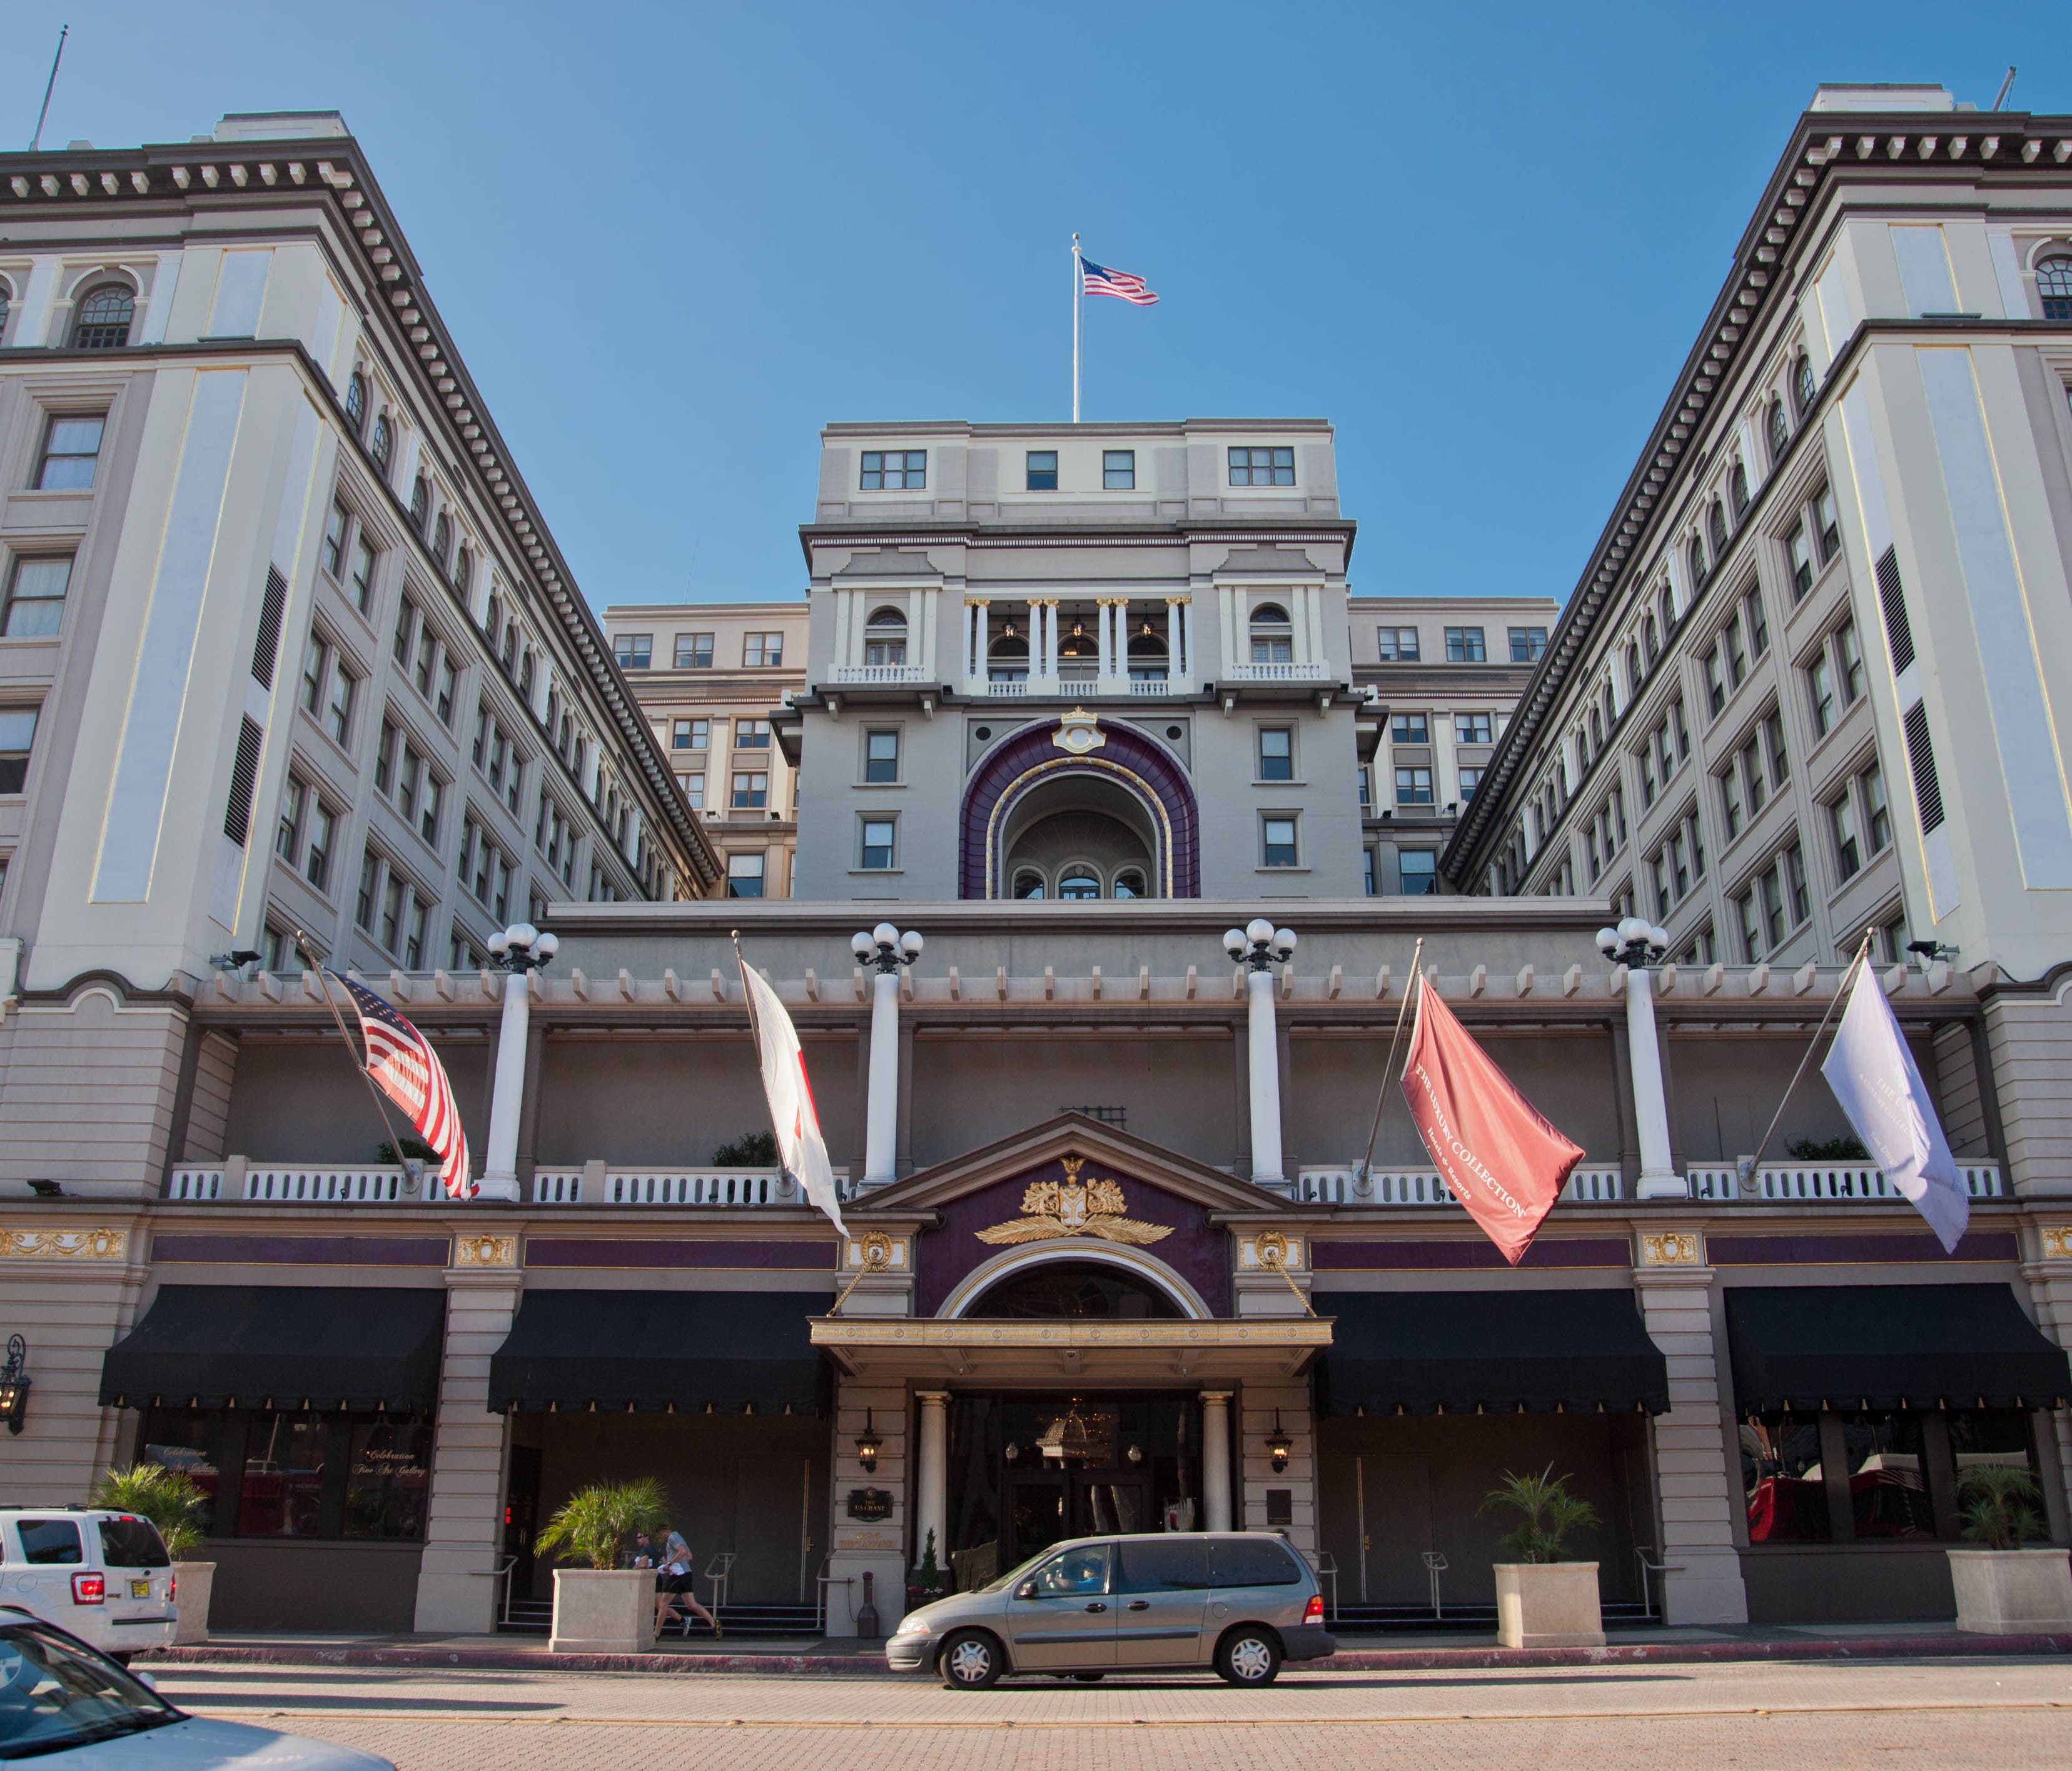 The U.S. Grant, a Luxury Collection Hotel, San Diego: Ulysses S. Grant, Jr., the son of the president, built this Gaslamp Quarter hotel in 1910. During Prohibition, the Grant was home to the Plata Real Nightclub, a popular speakeasy. By the 1950s and